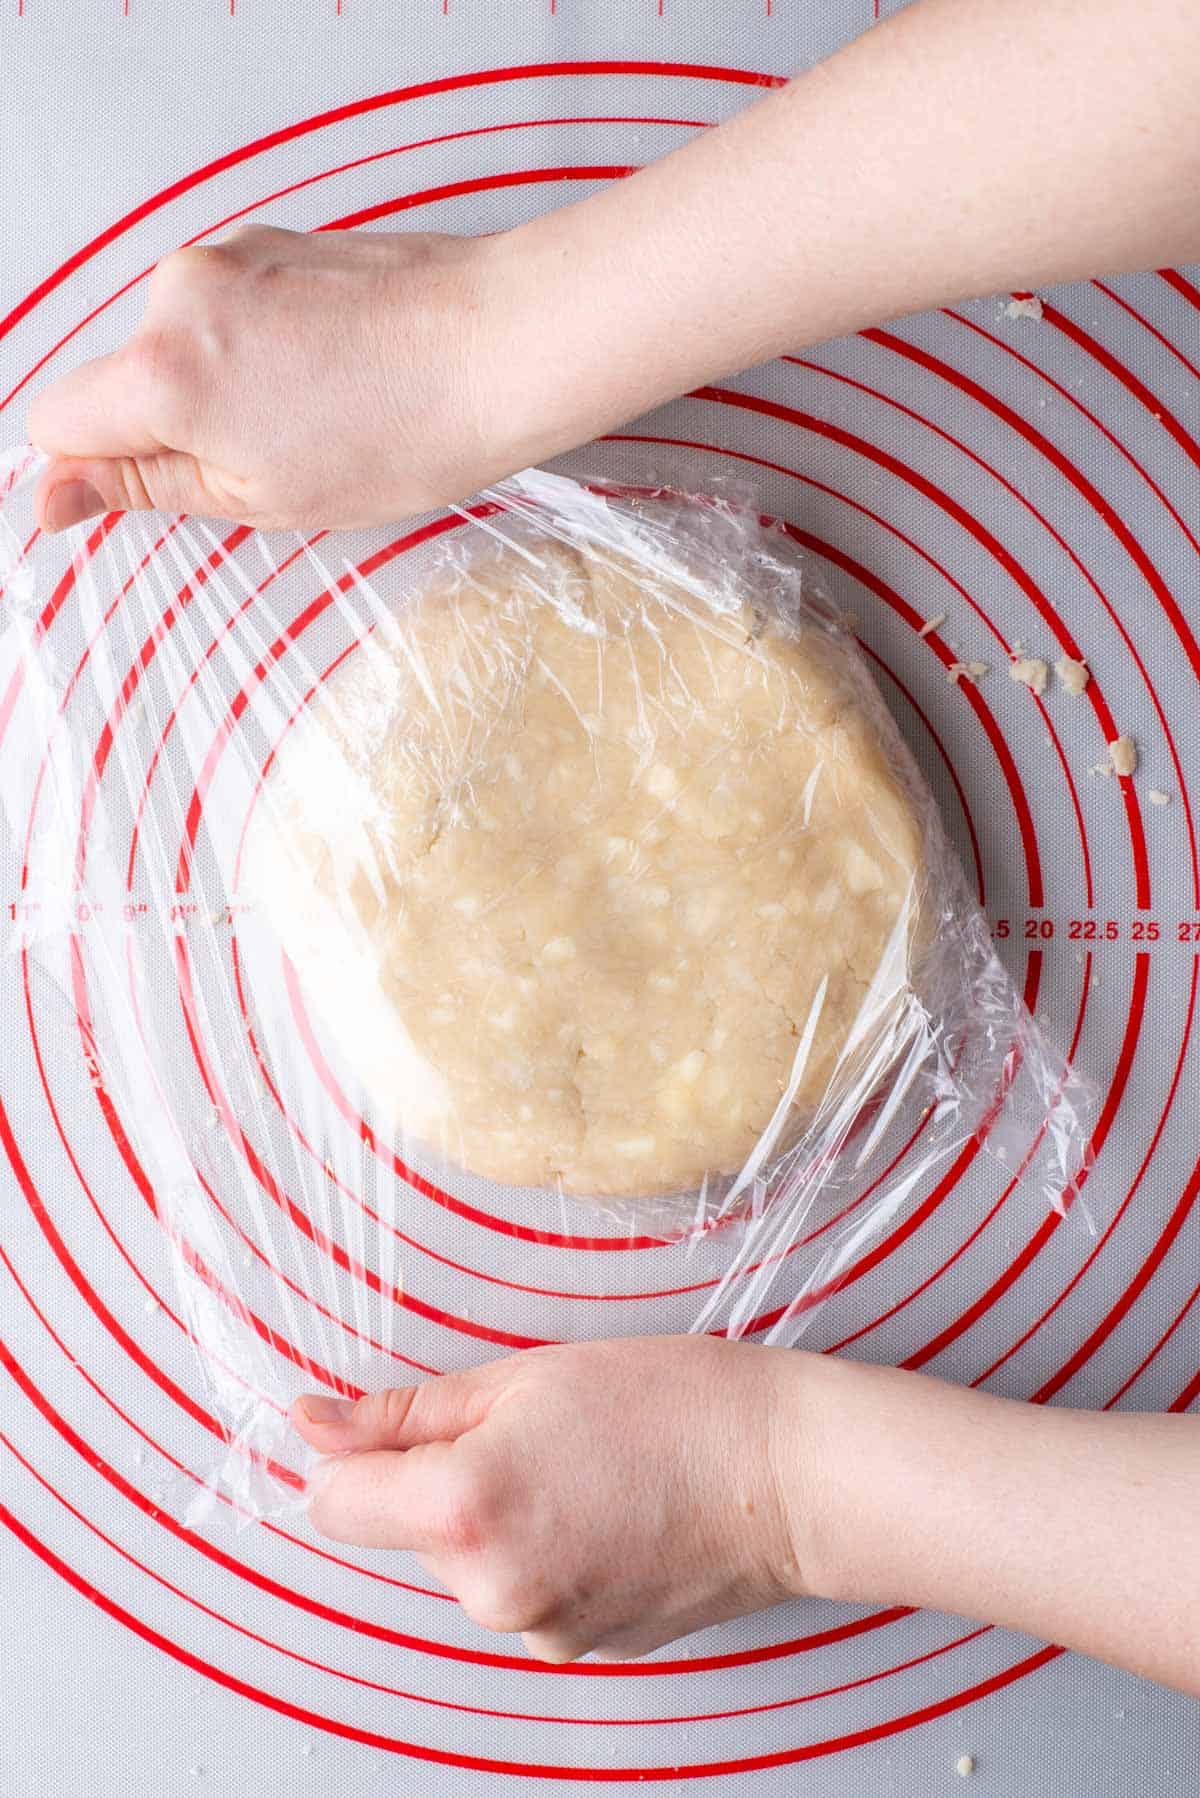 a disc of pie crust dough sitting on a red and white pie mat being wrapped with clear plastic wrap